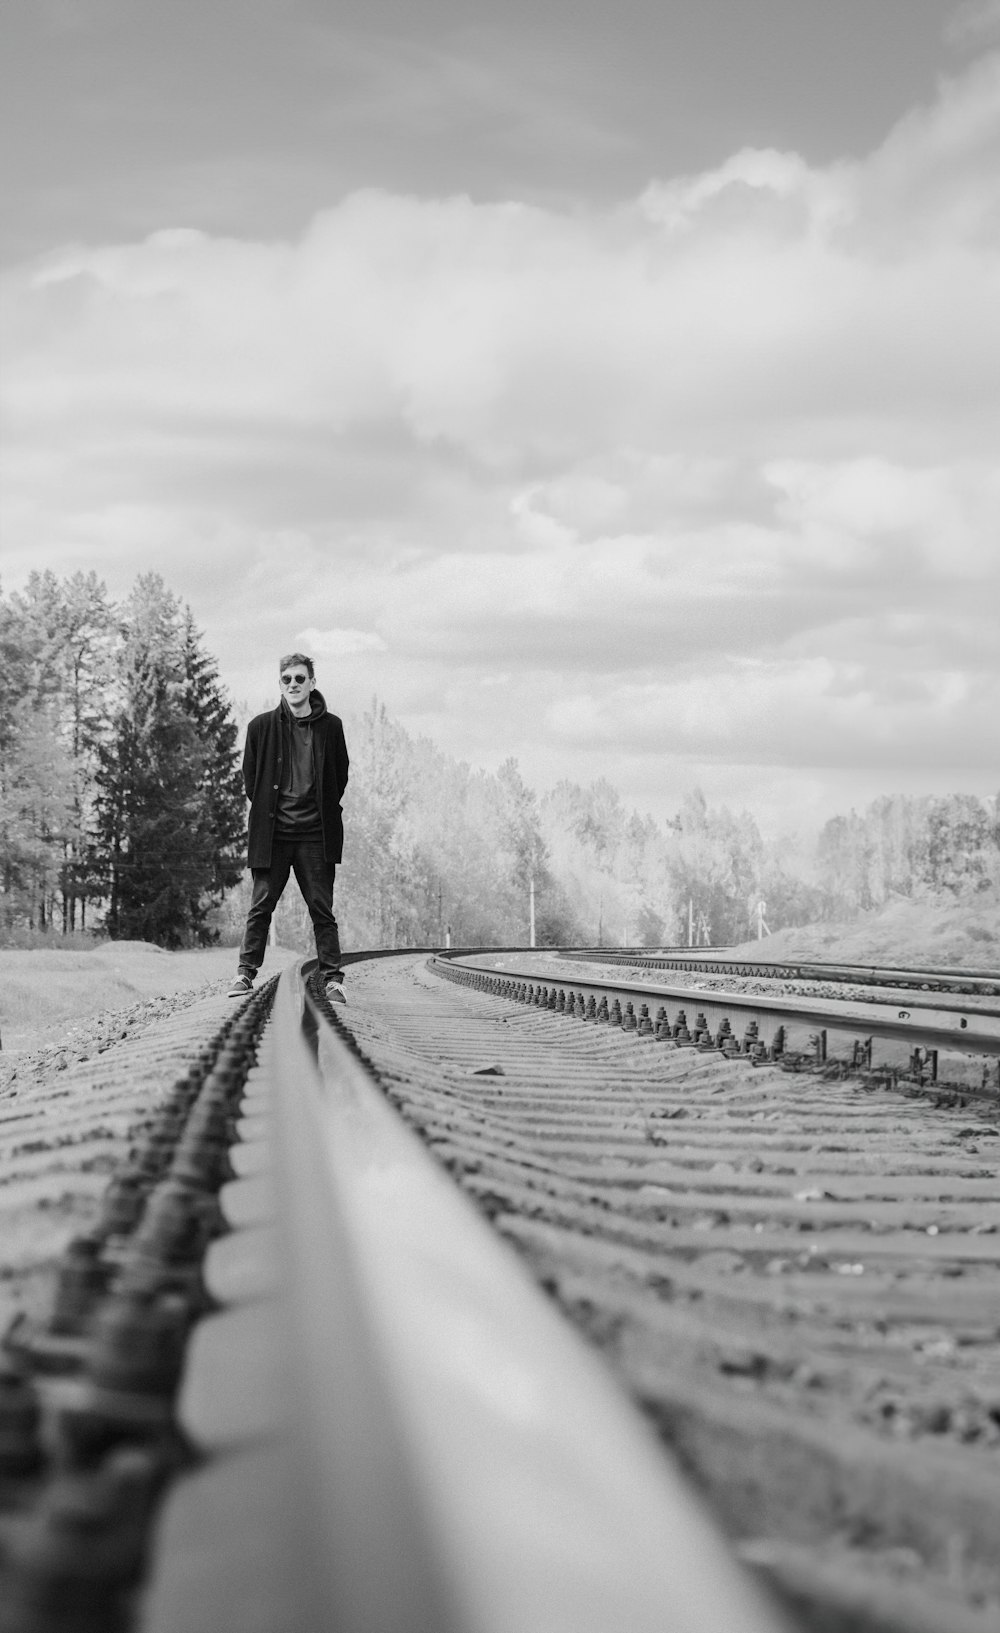 a man standing on a train track in a black and white photo